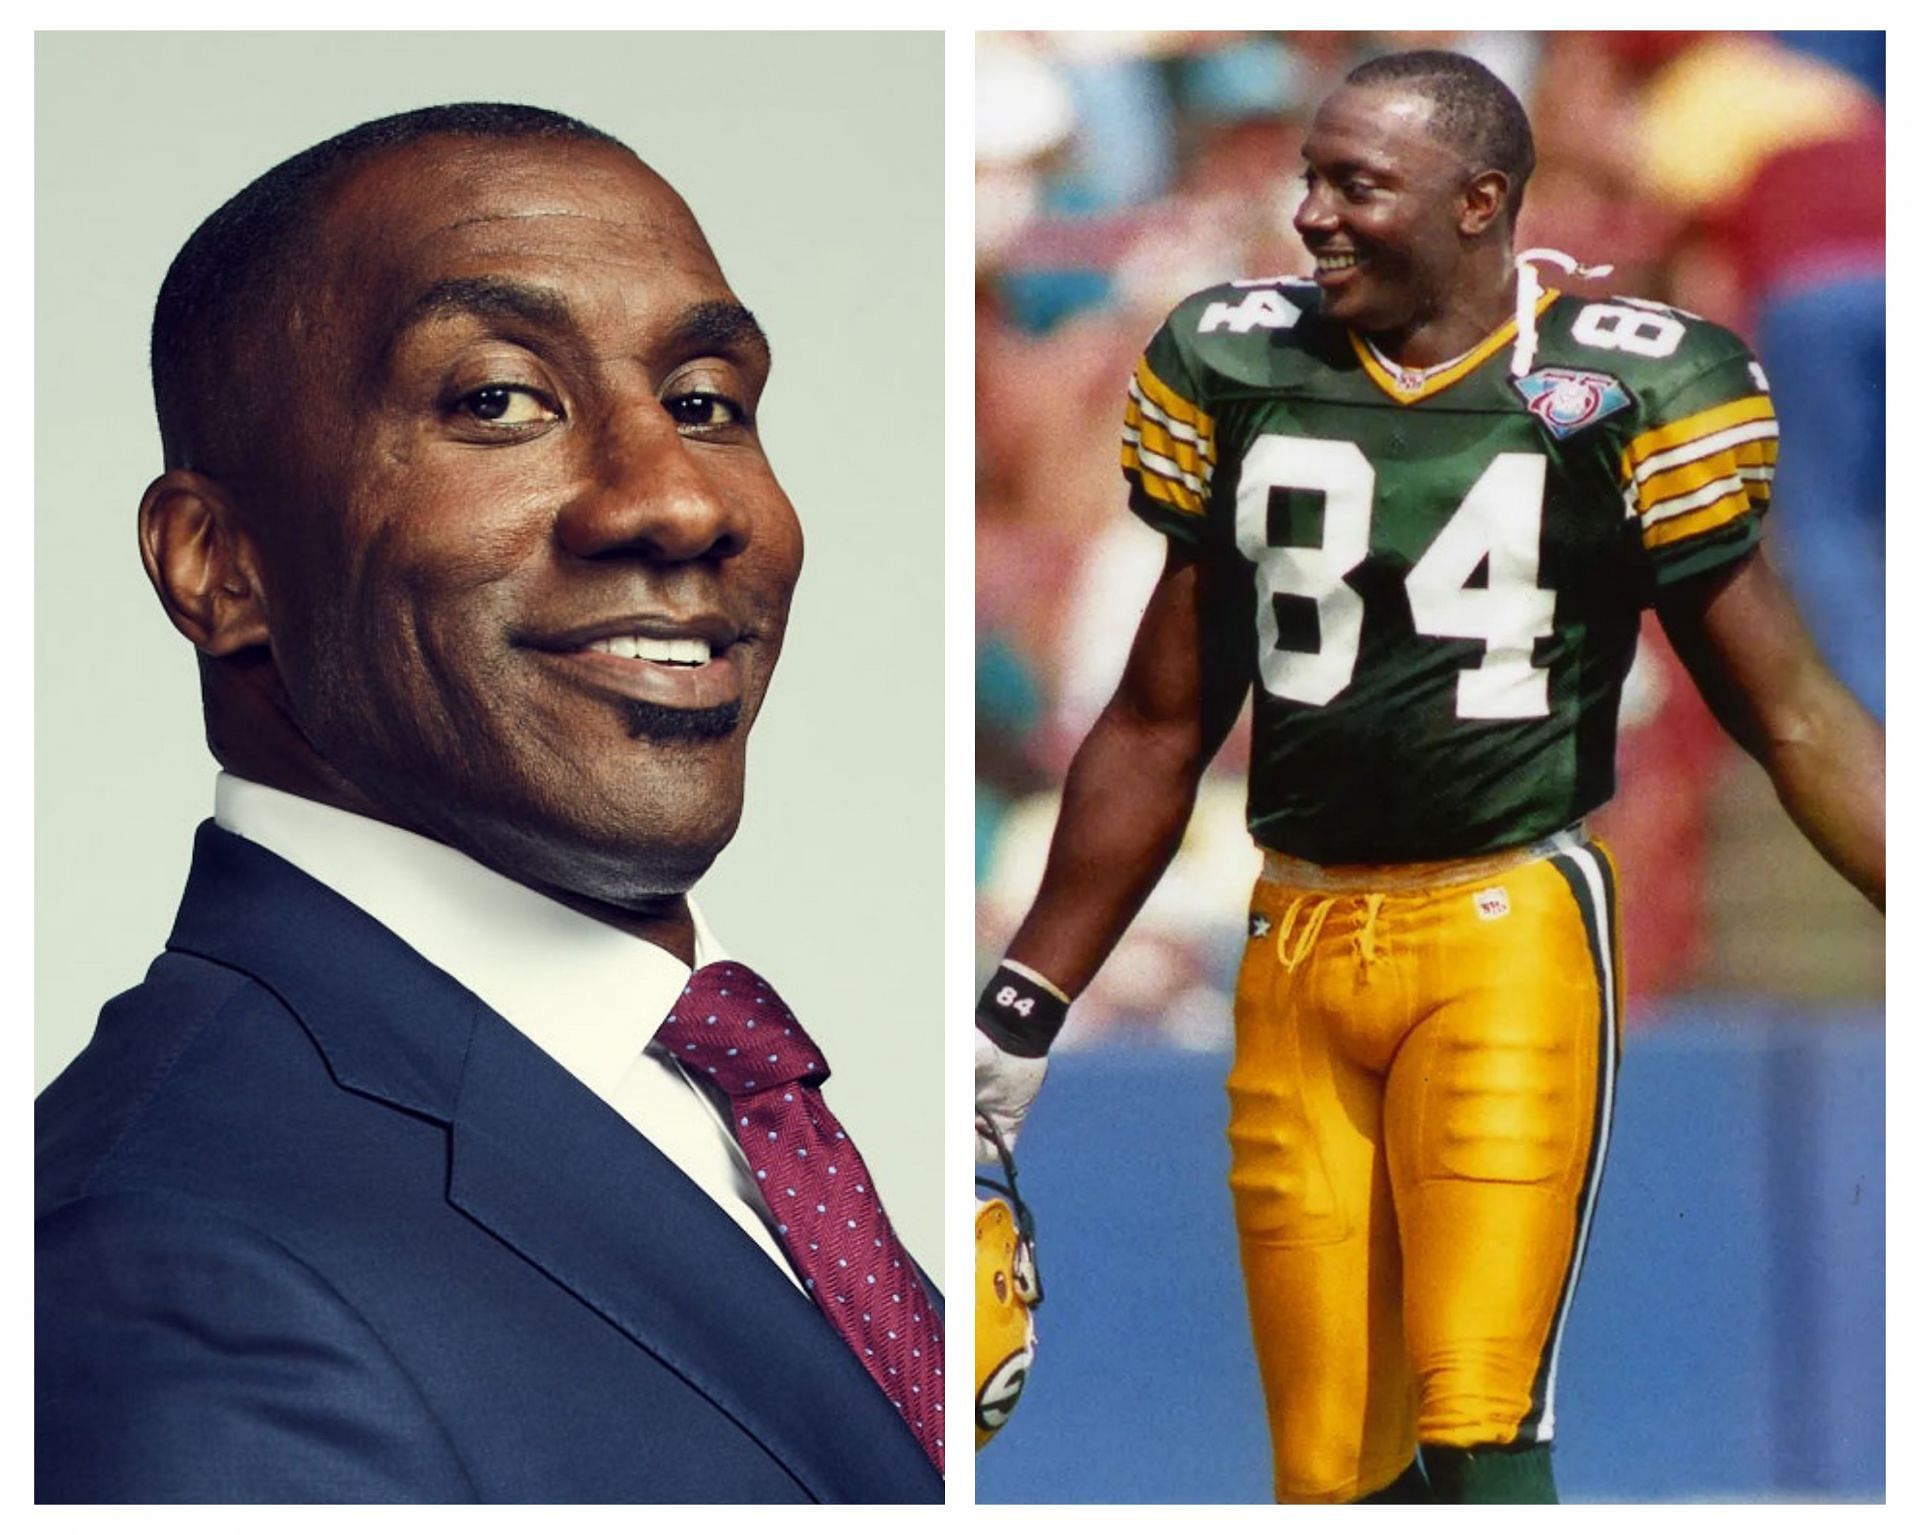 Why did Sterling Sharpe retire early? Career breakdown of Shannon Sharpe's  brother